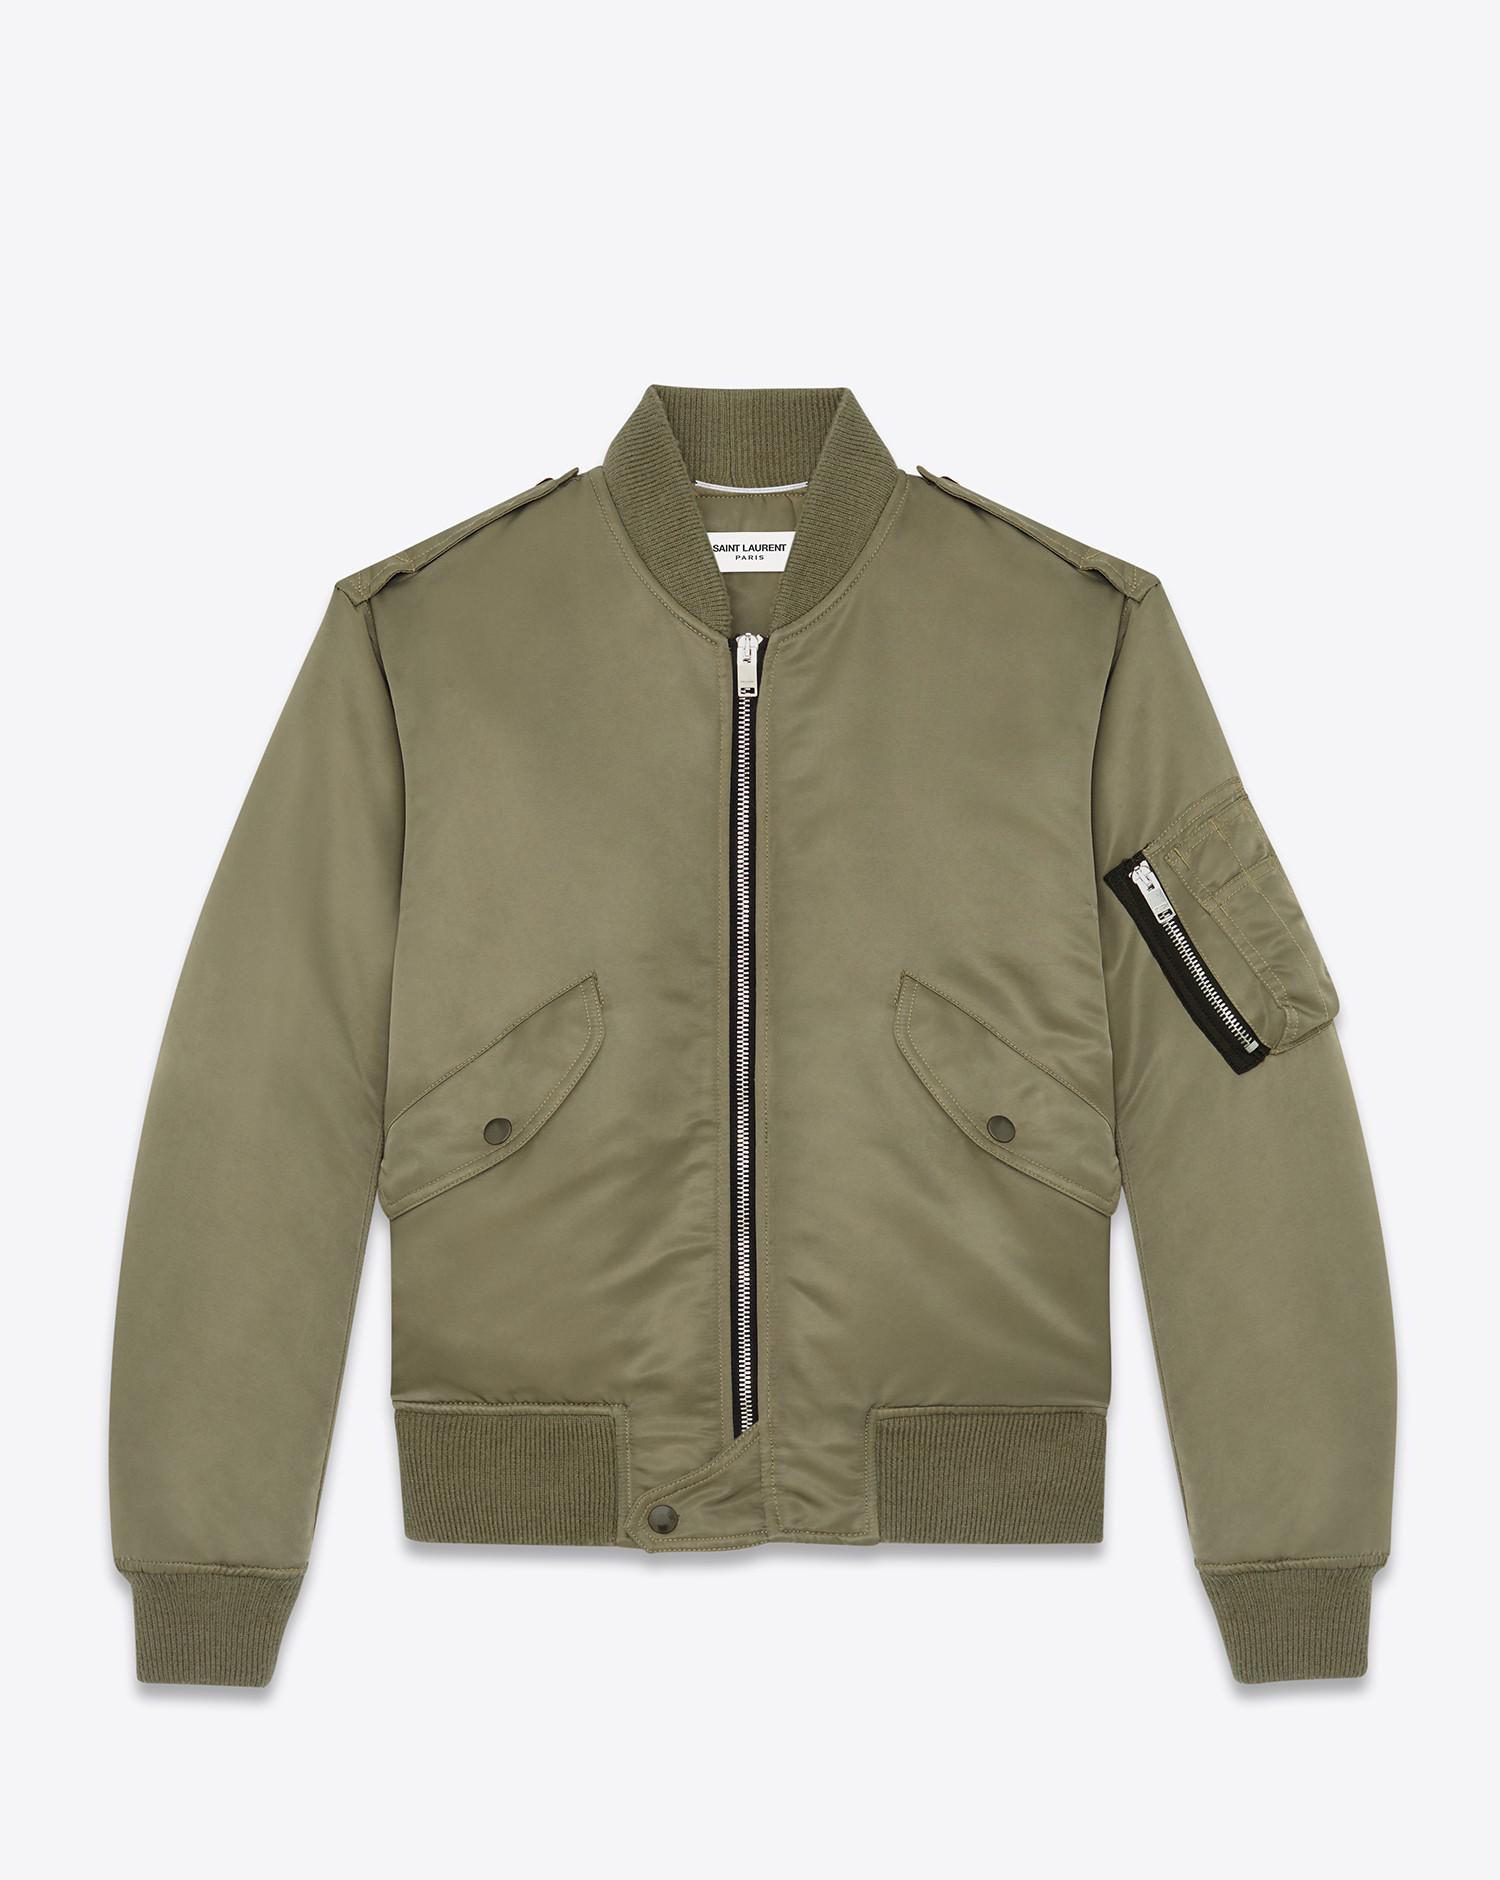 Saint Laurent Synthetic Bomber Jacket In Nylon in Army Green (Green ...